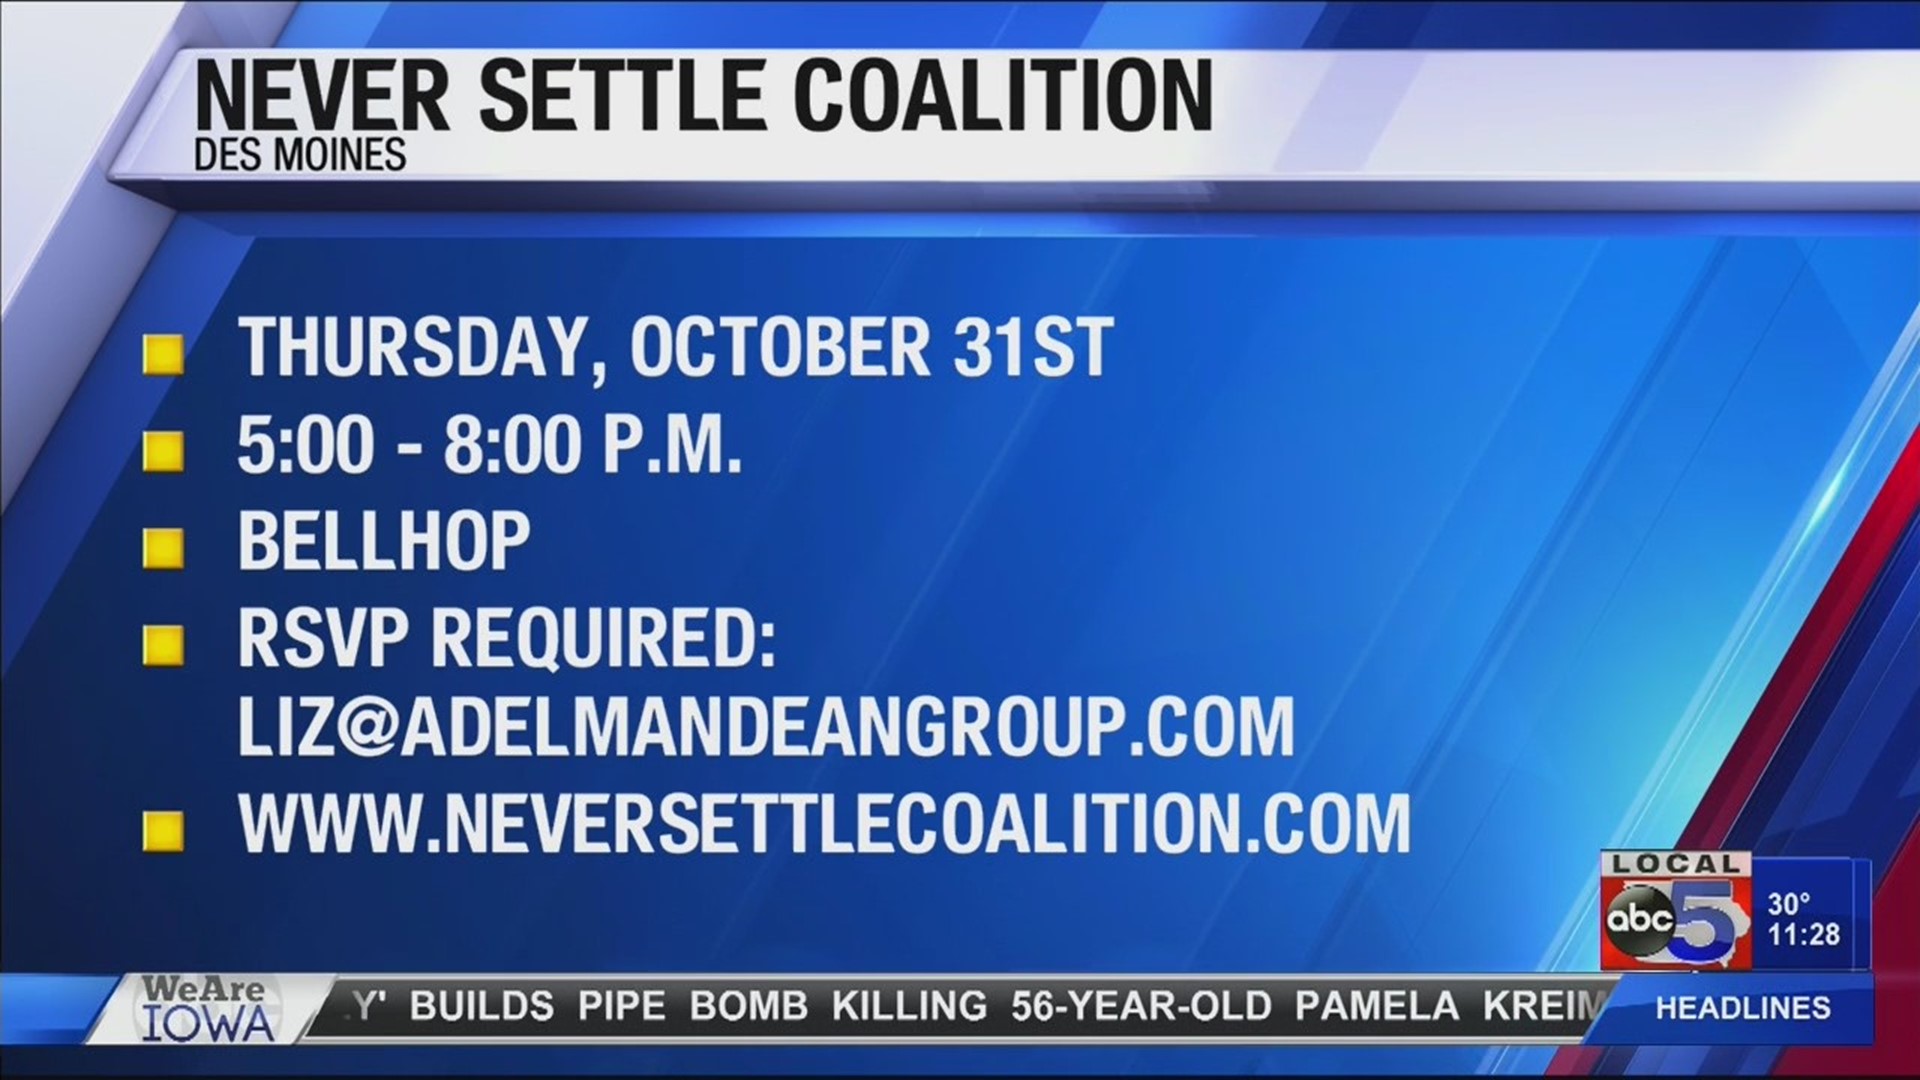 Never Settle Coalition is launching Thursday in Des Moines.